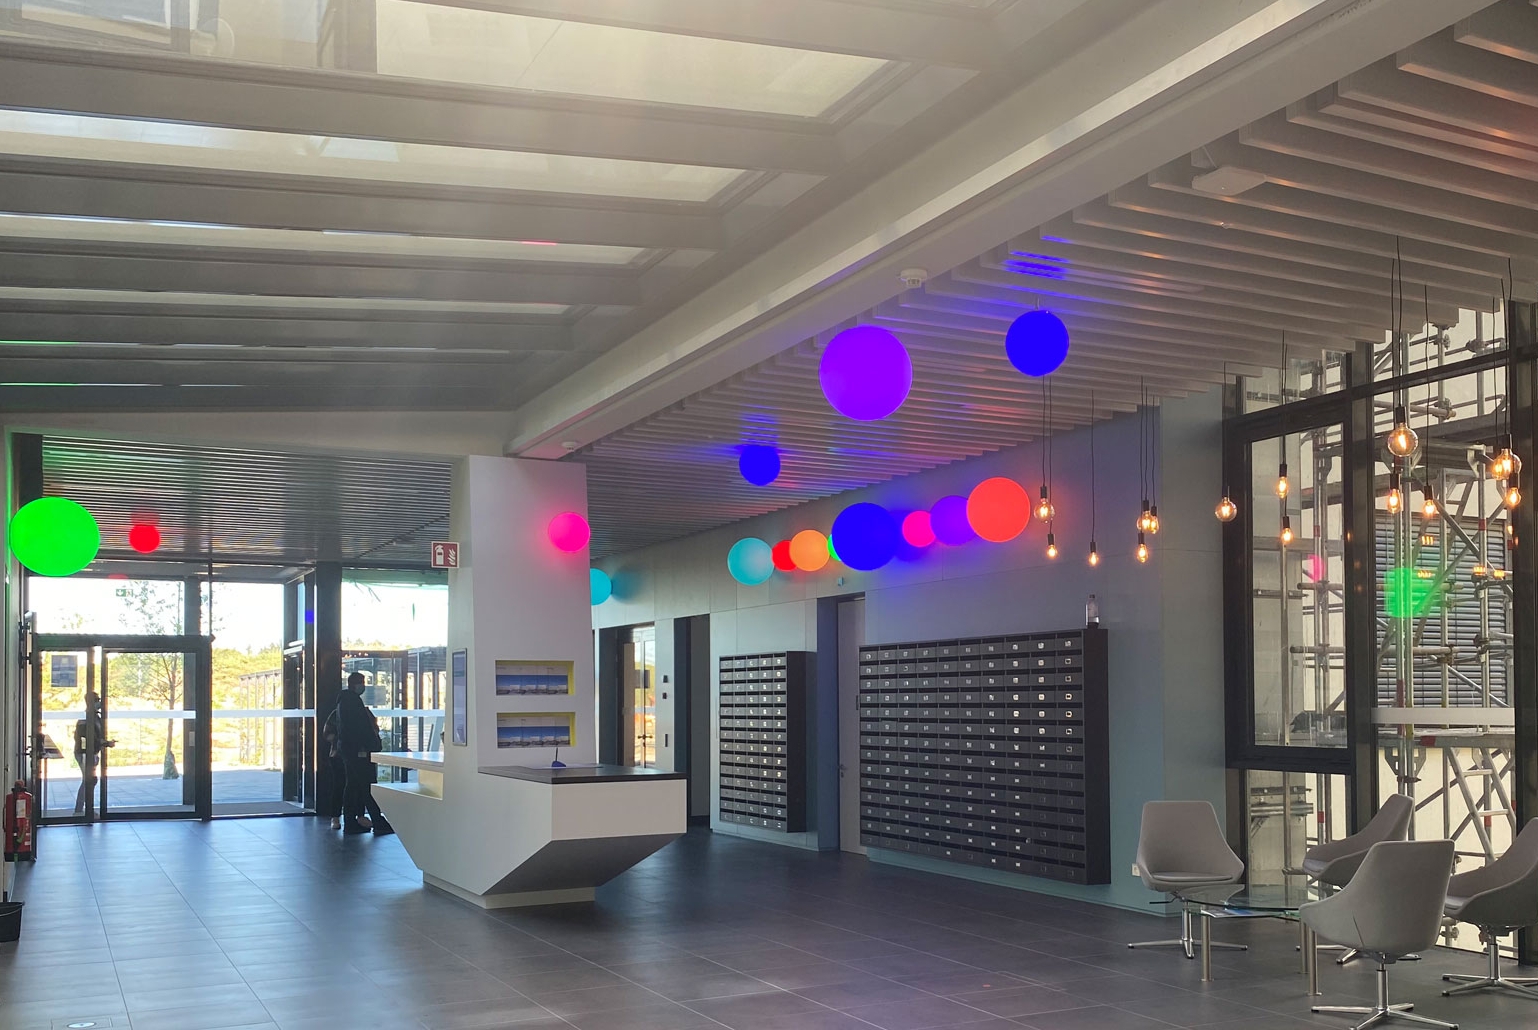 Light globes installed in the foyer at Fraunhofer IPM